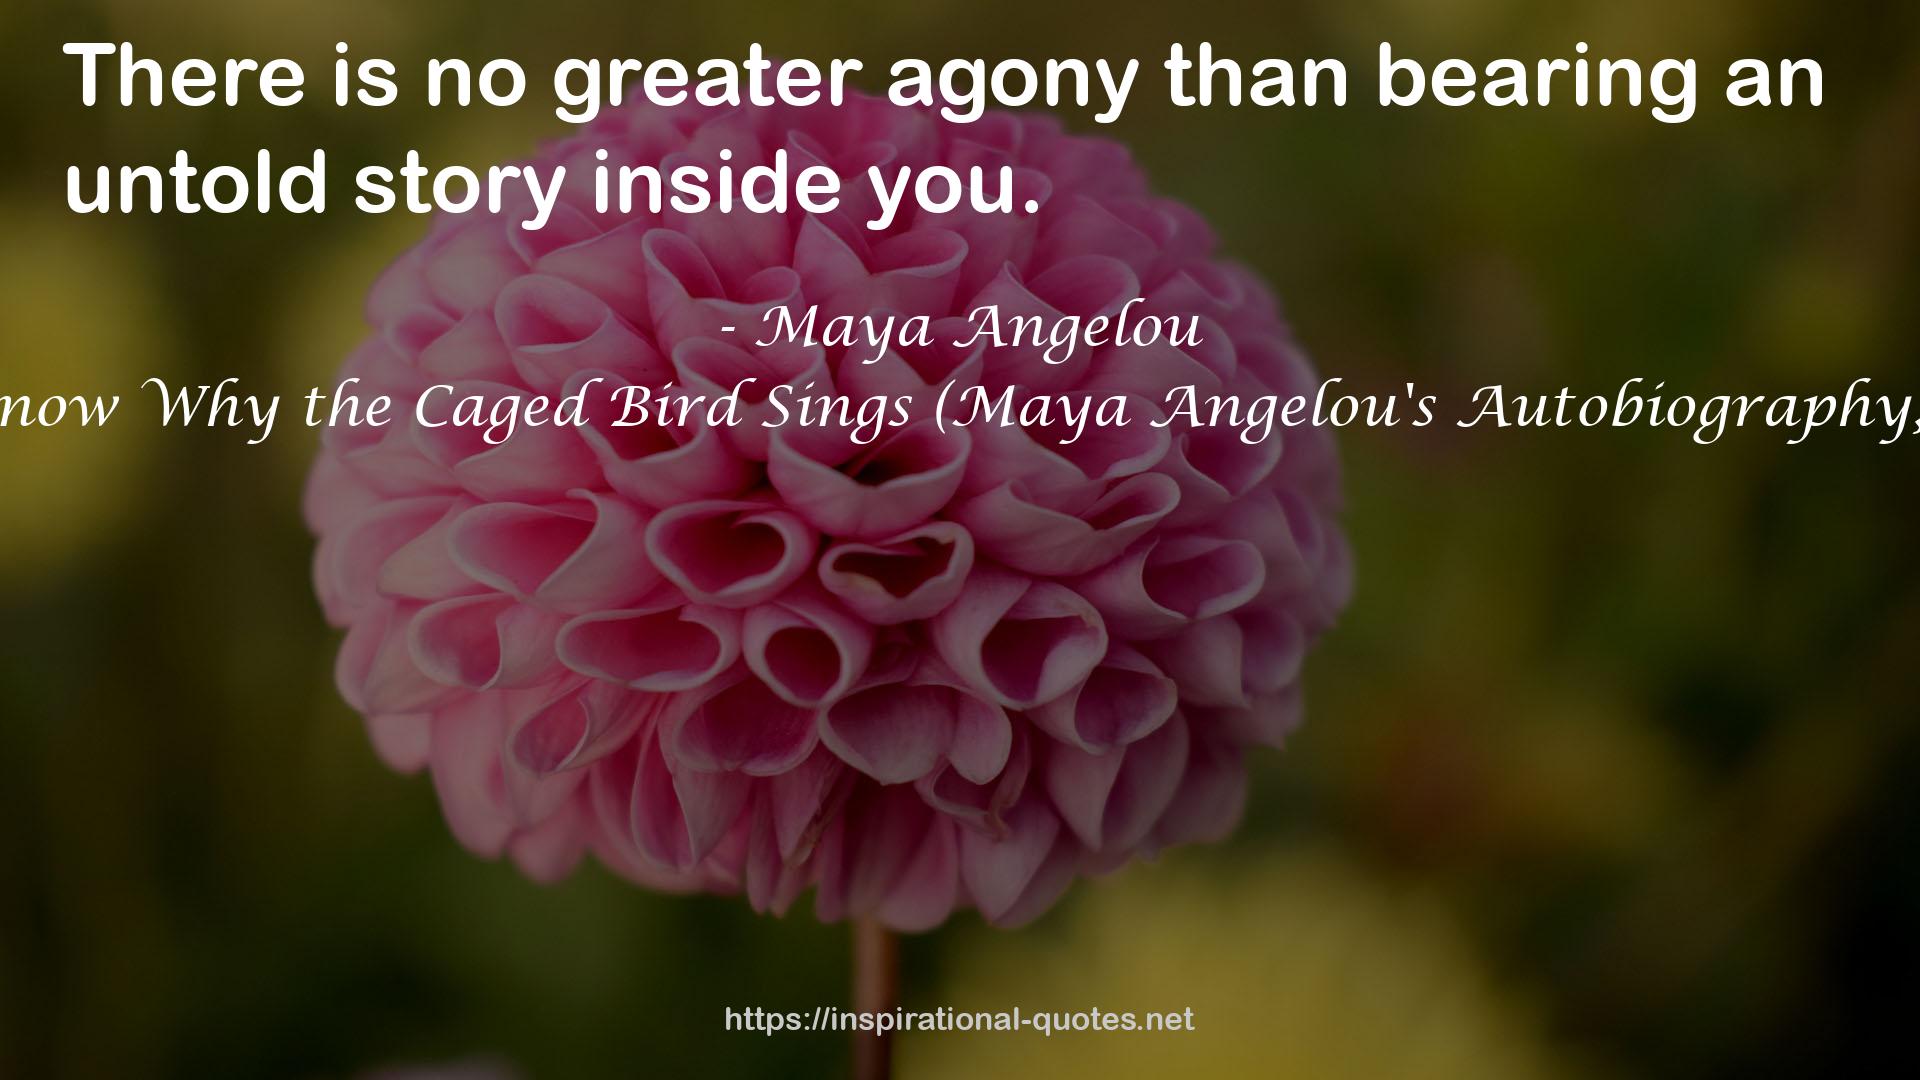 I Know Why the Caged Bird Sings (Maya Angelou's Autobiography, #1) QUOTES